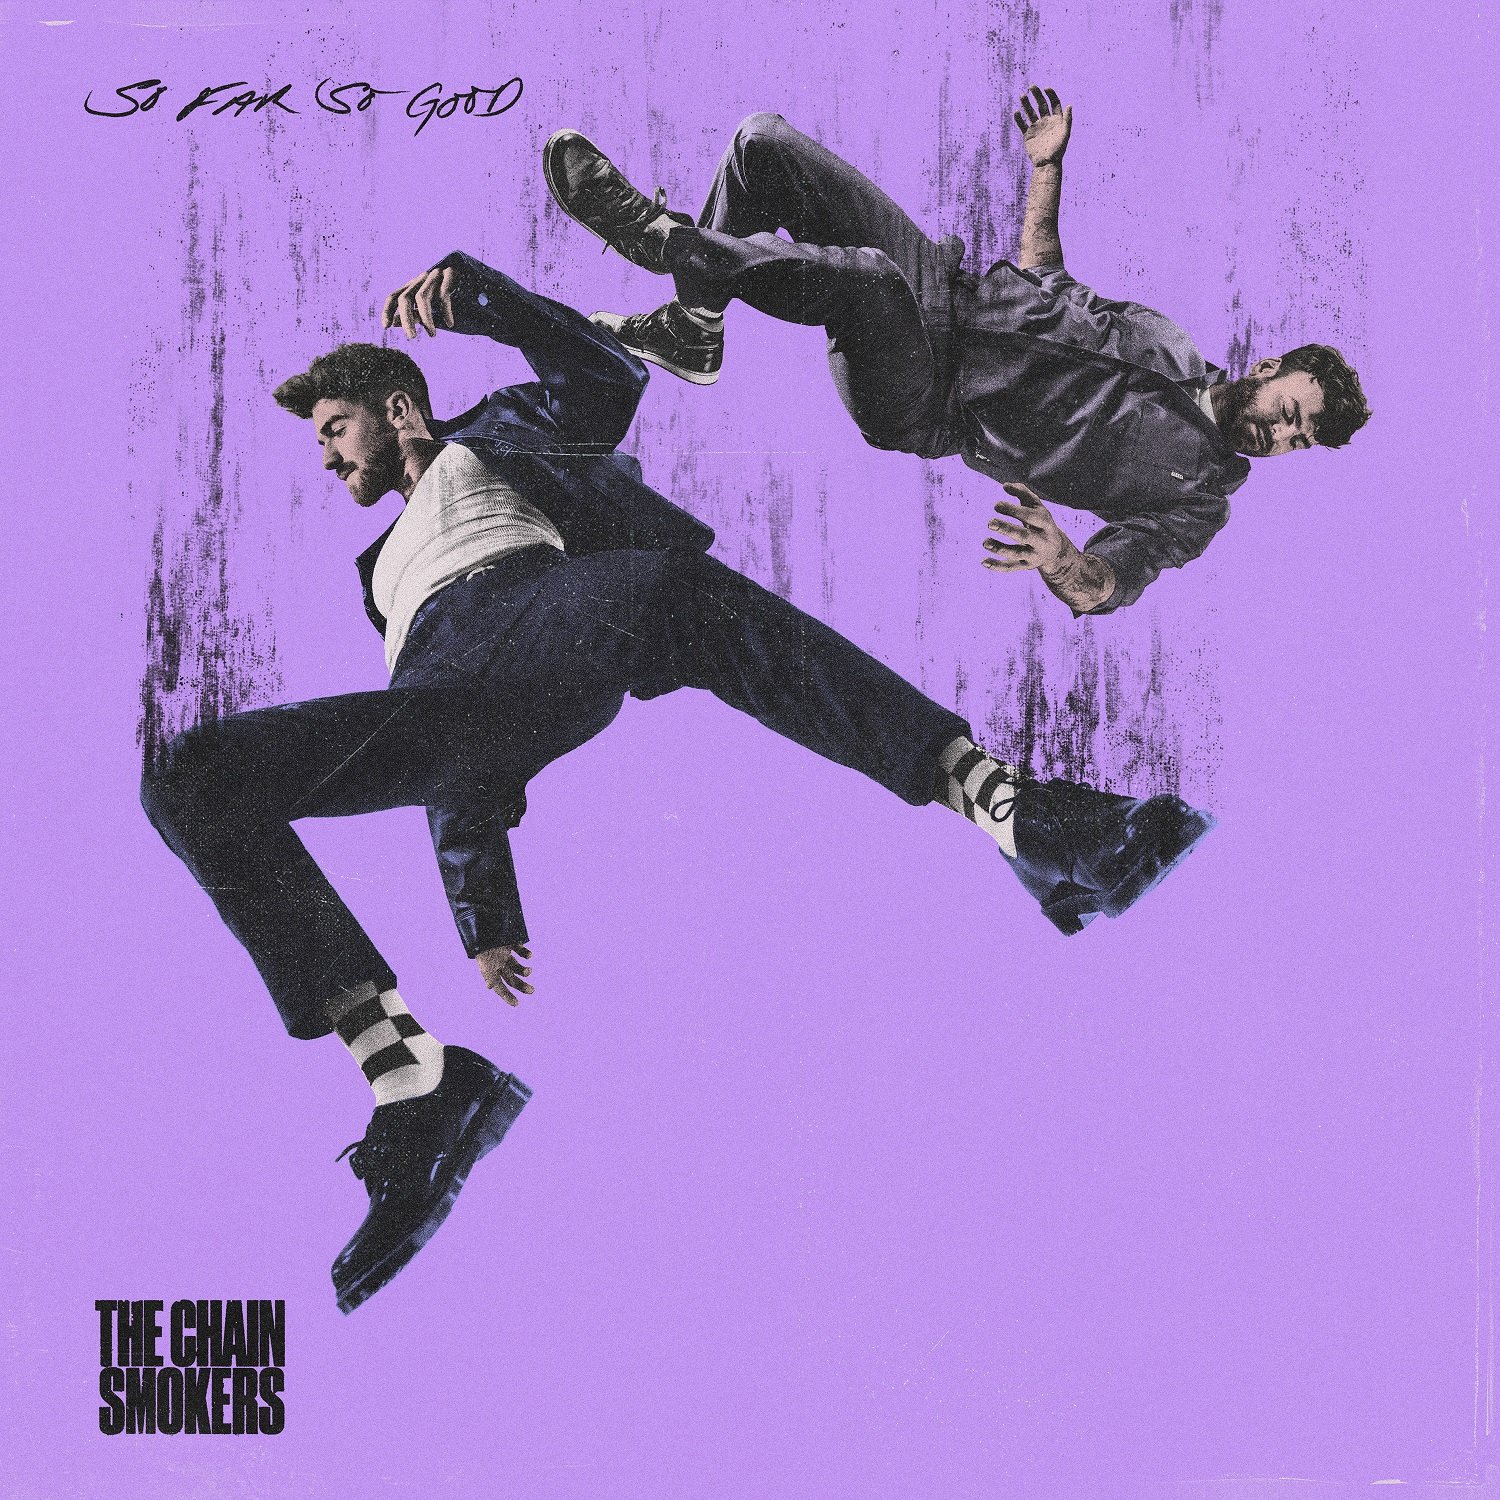 The Chainsmokers - So Far So Good (2022) FLAC Download